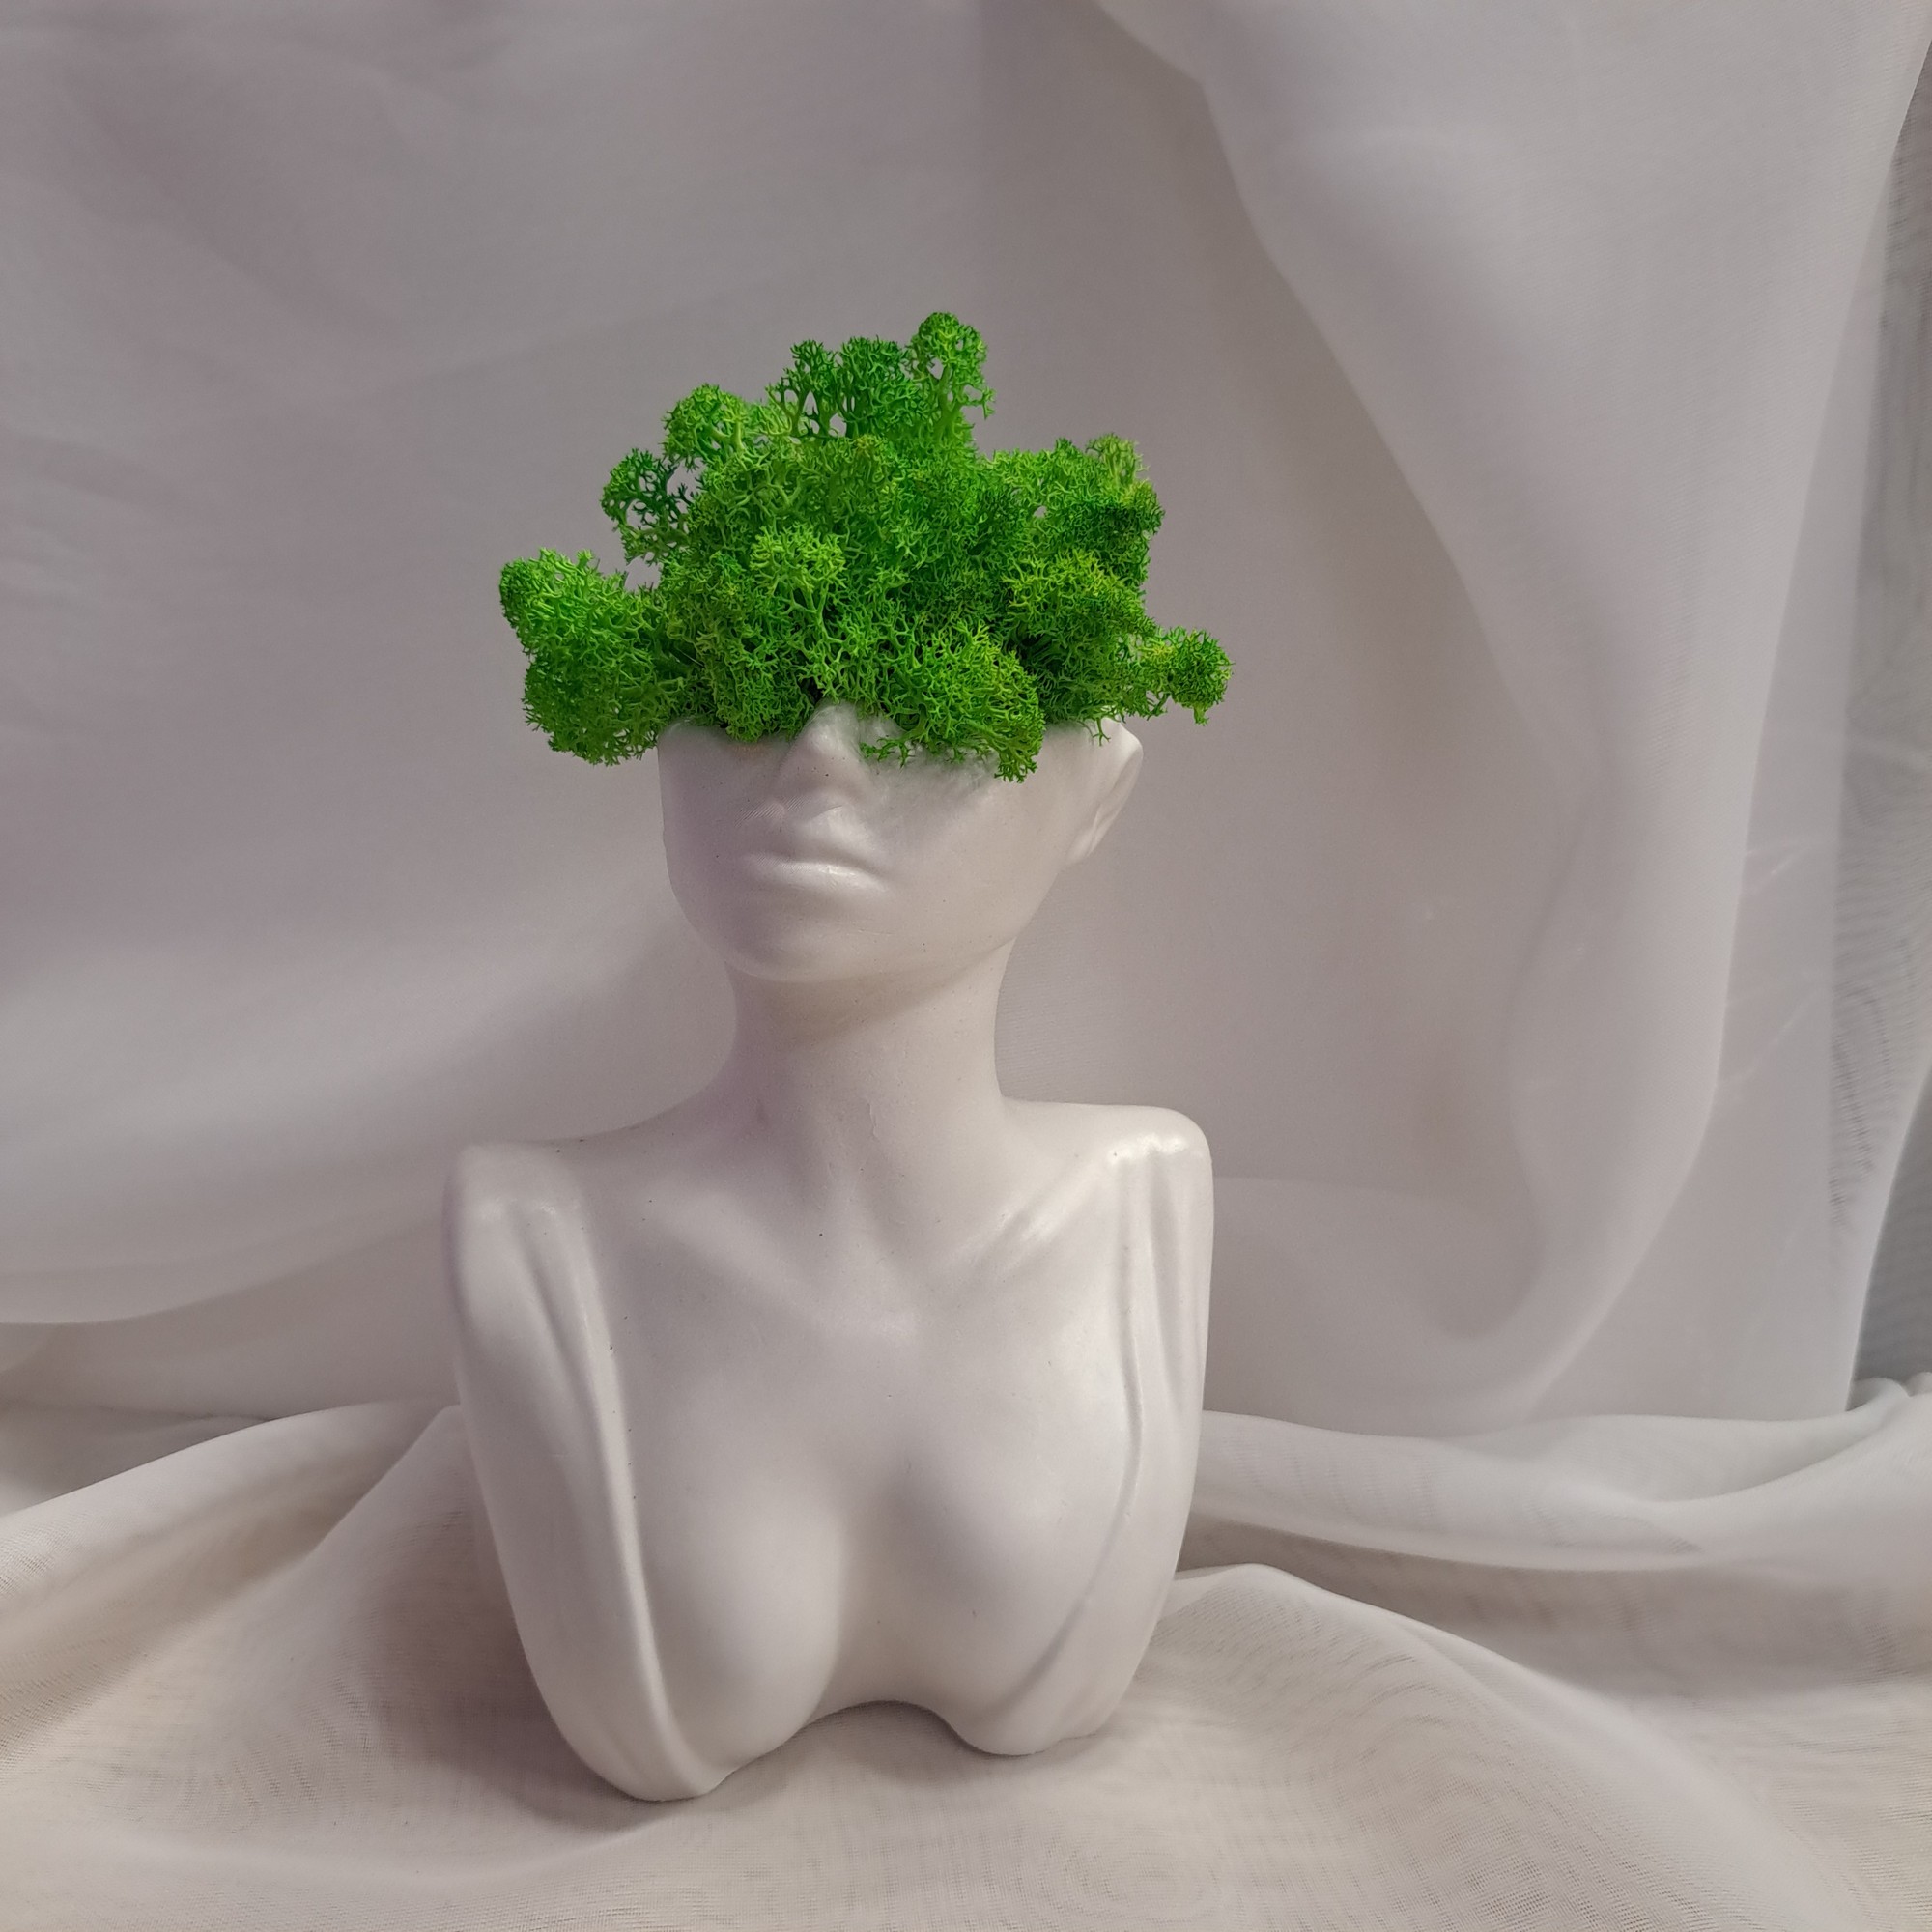 Vase-shaped planter filled with lush green moss "Virgo"